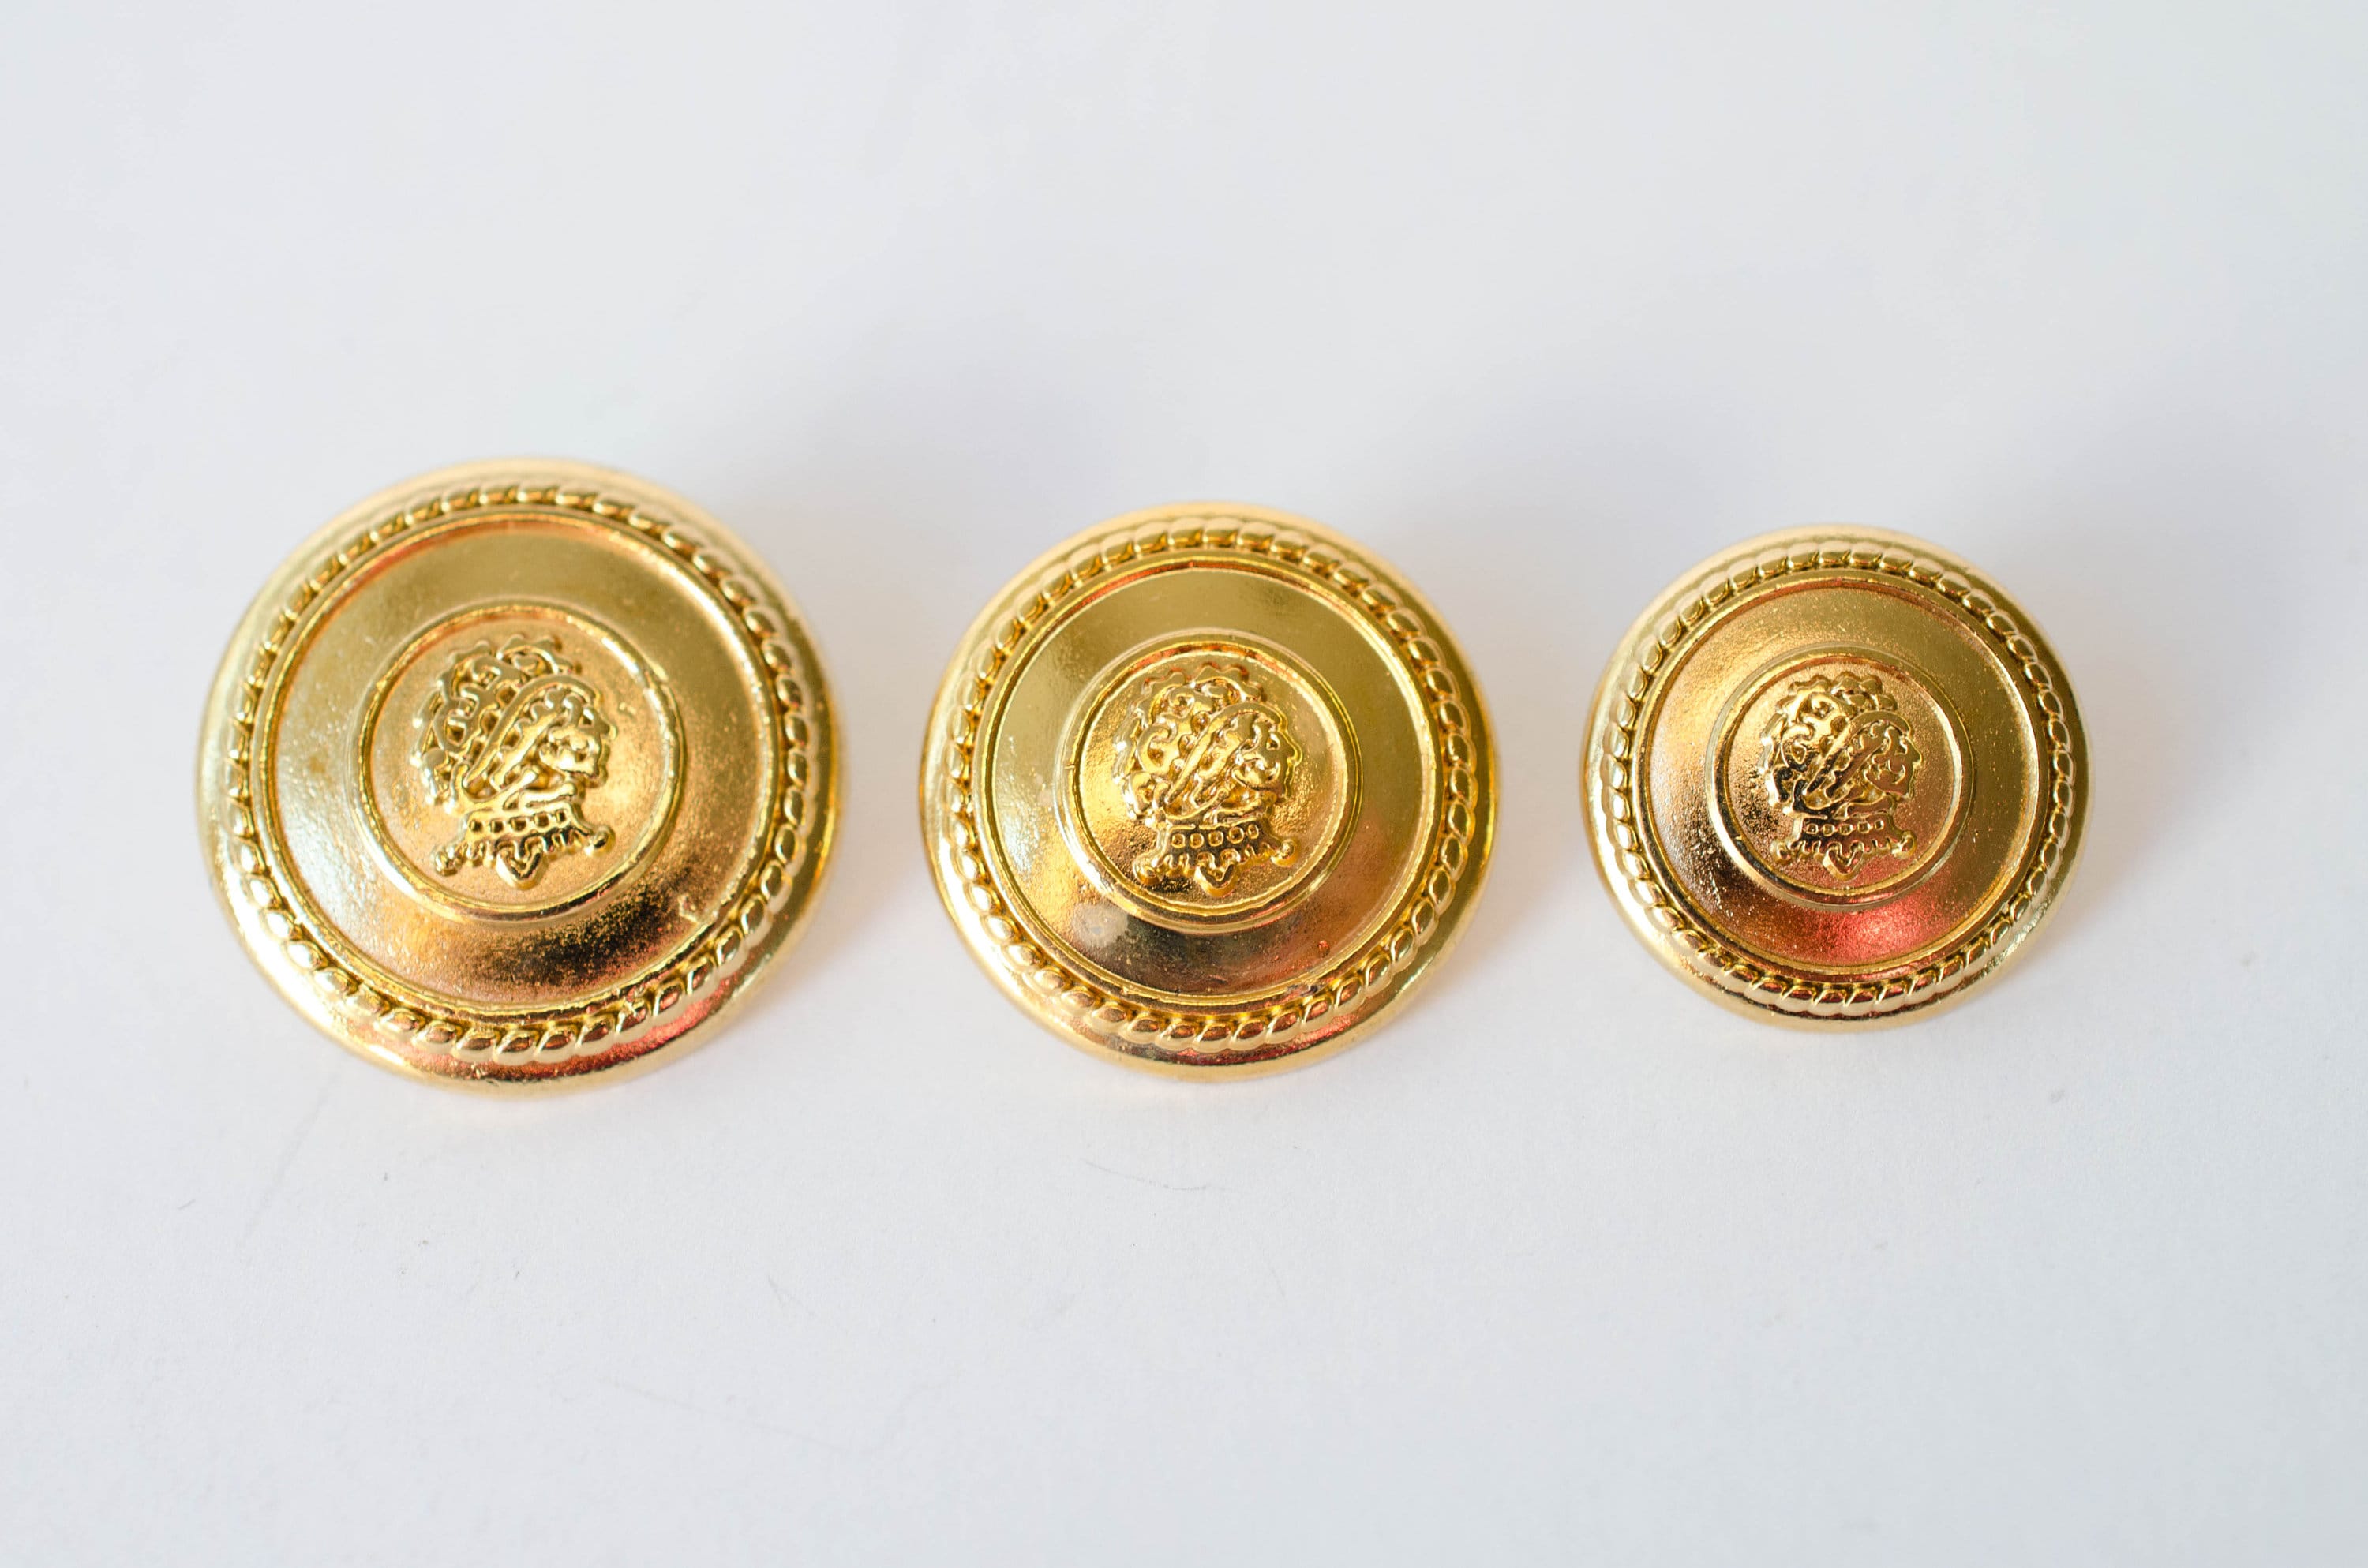 Premium NEW ~GOLD GOLF KING'S CREST~ METAL BLAZER BUTTON SET ~ 14-Piece Set  of Shank Style Fashion Buttons For Double Breasted Blazers, Sport Coats